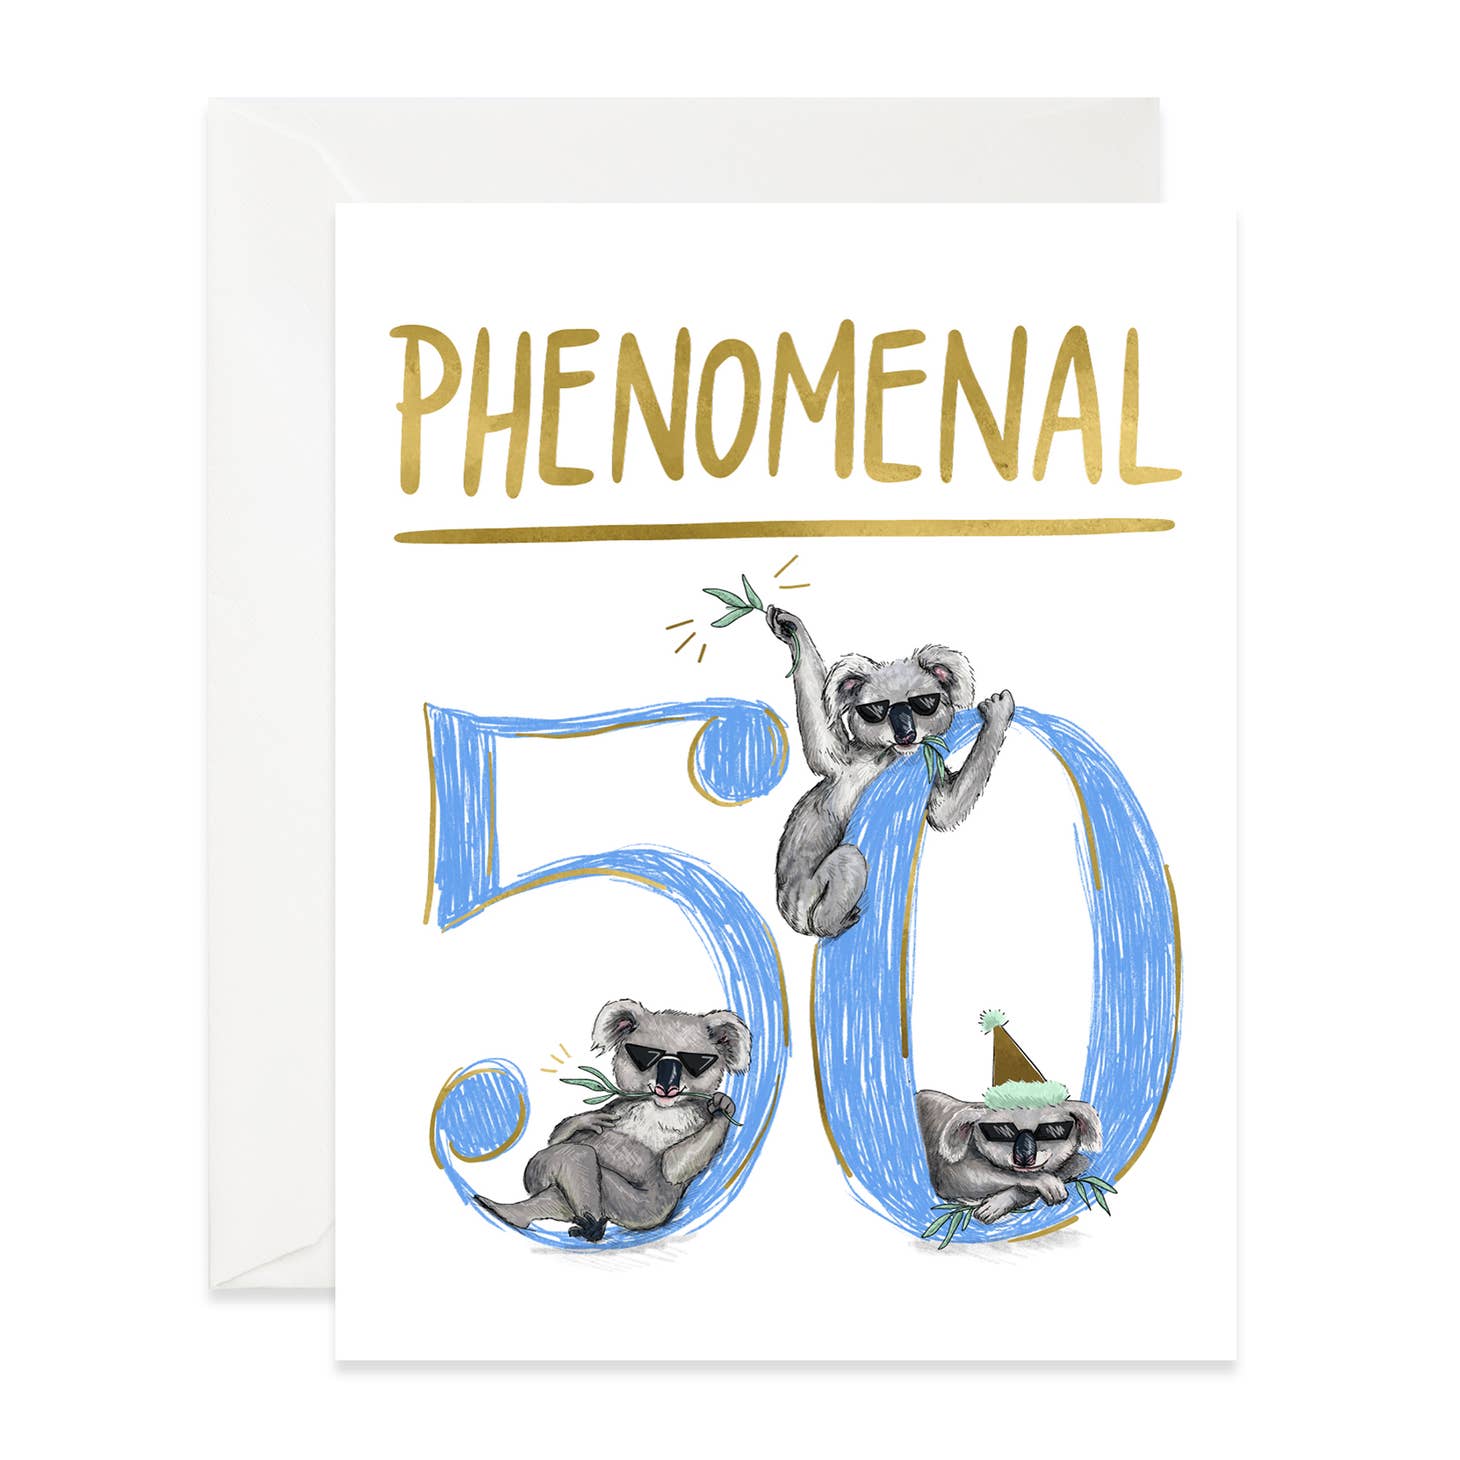 White background with image of large blue "50" with  three koalas lying on it. Gold text says, "Phenomenal". White envelope is included, 